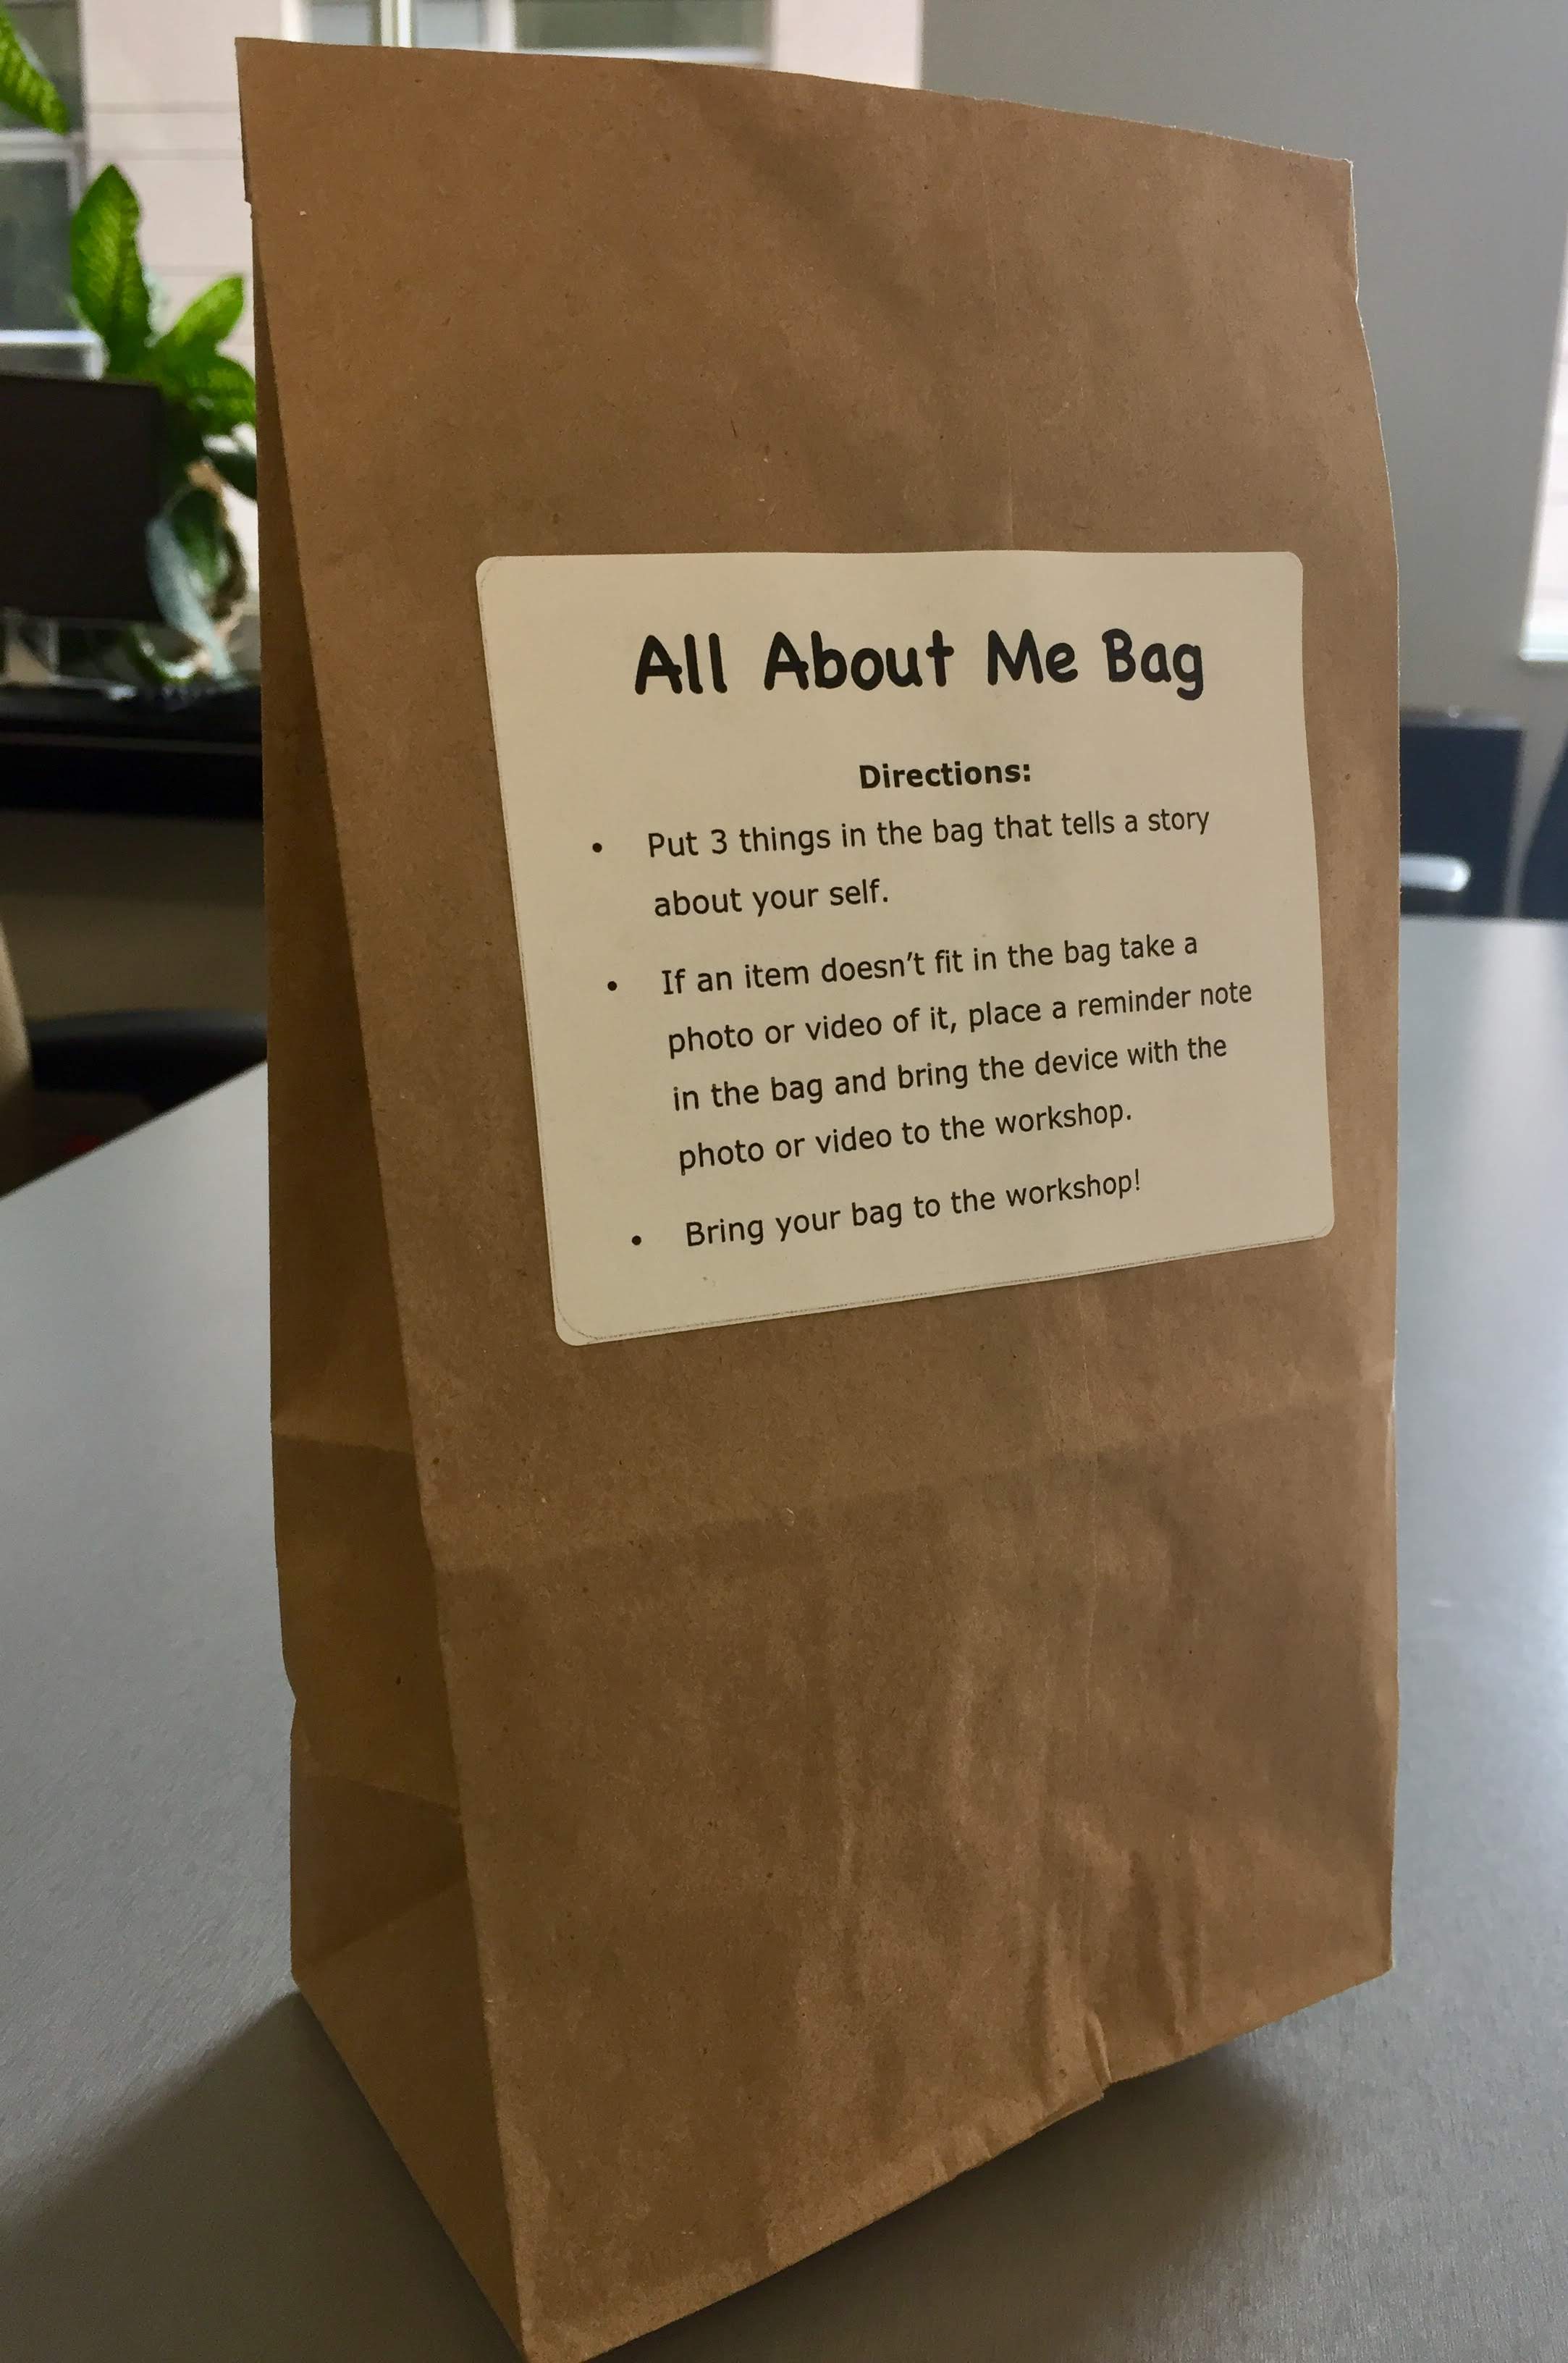 Paper bag with All About Me Bag 3-step instructions label stuck on the front